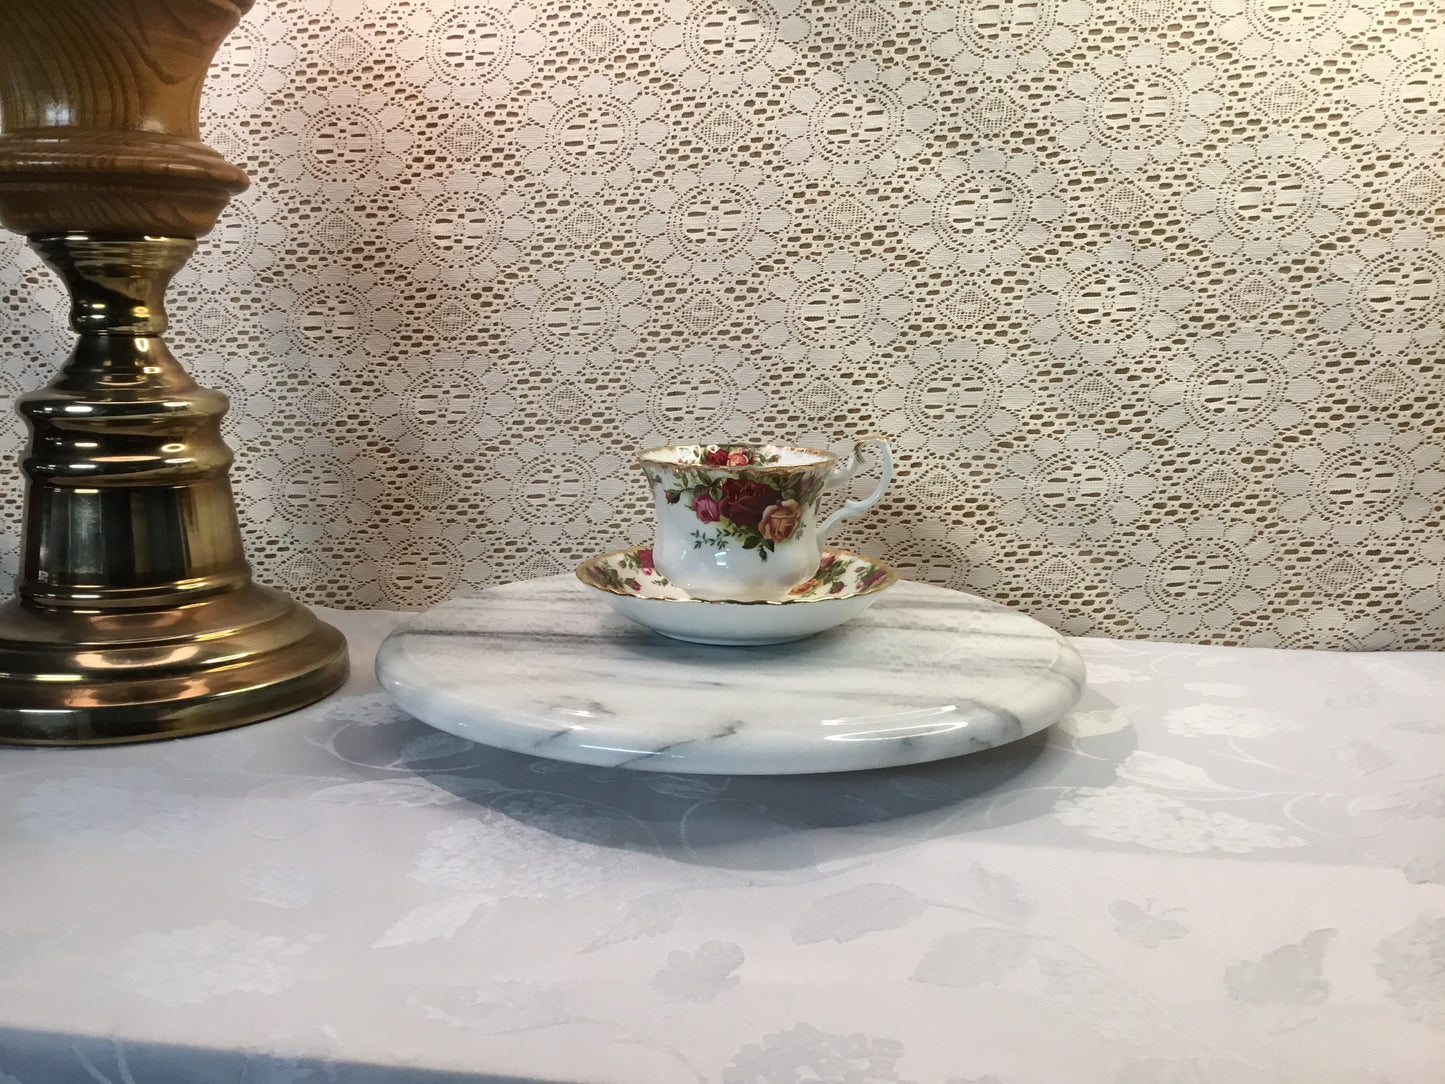 Royal Albert "Old Country Rose" Cup and Saucer